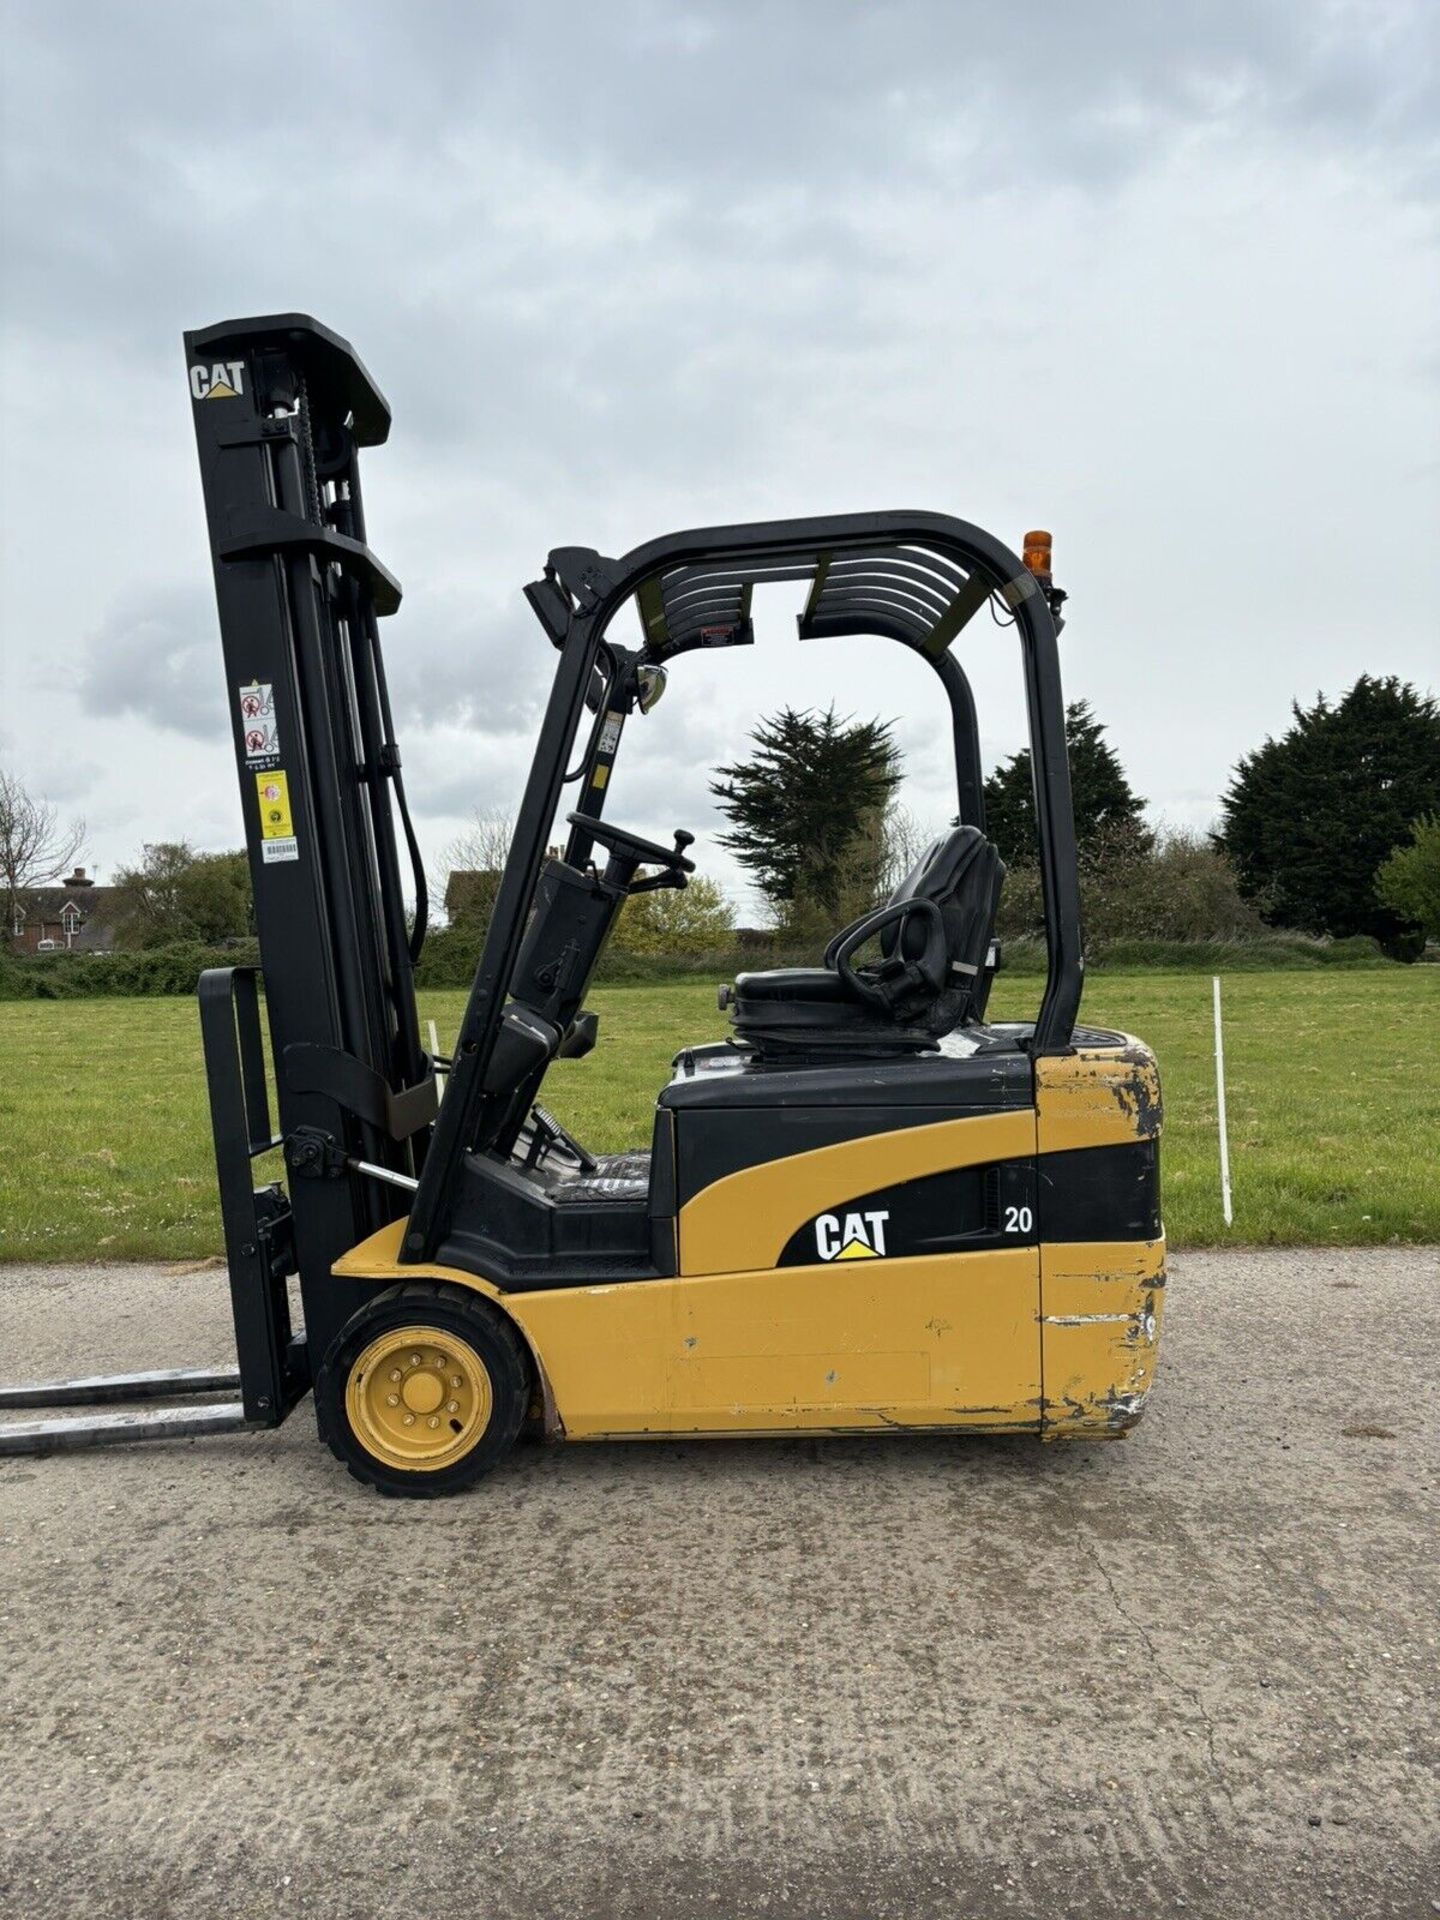 2011, CATERPILLAR - Electric Forklift Truck - Image 8 of 8